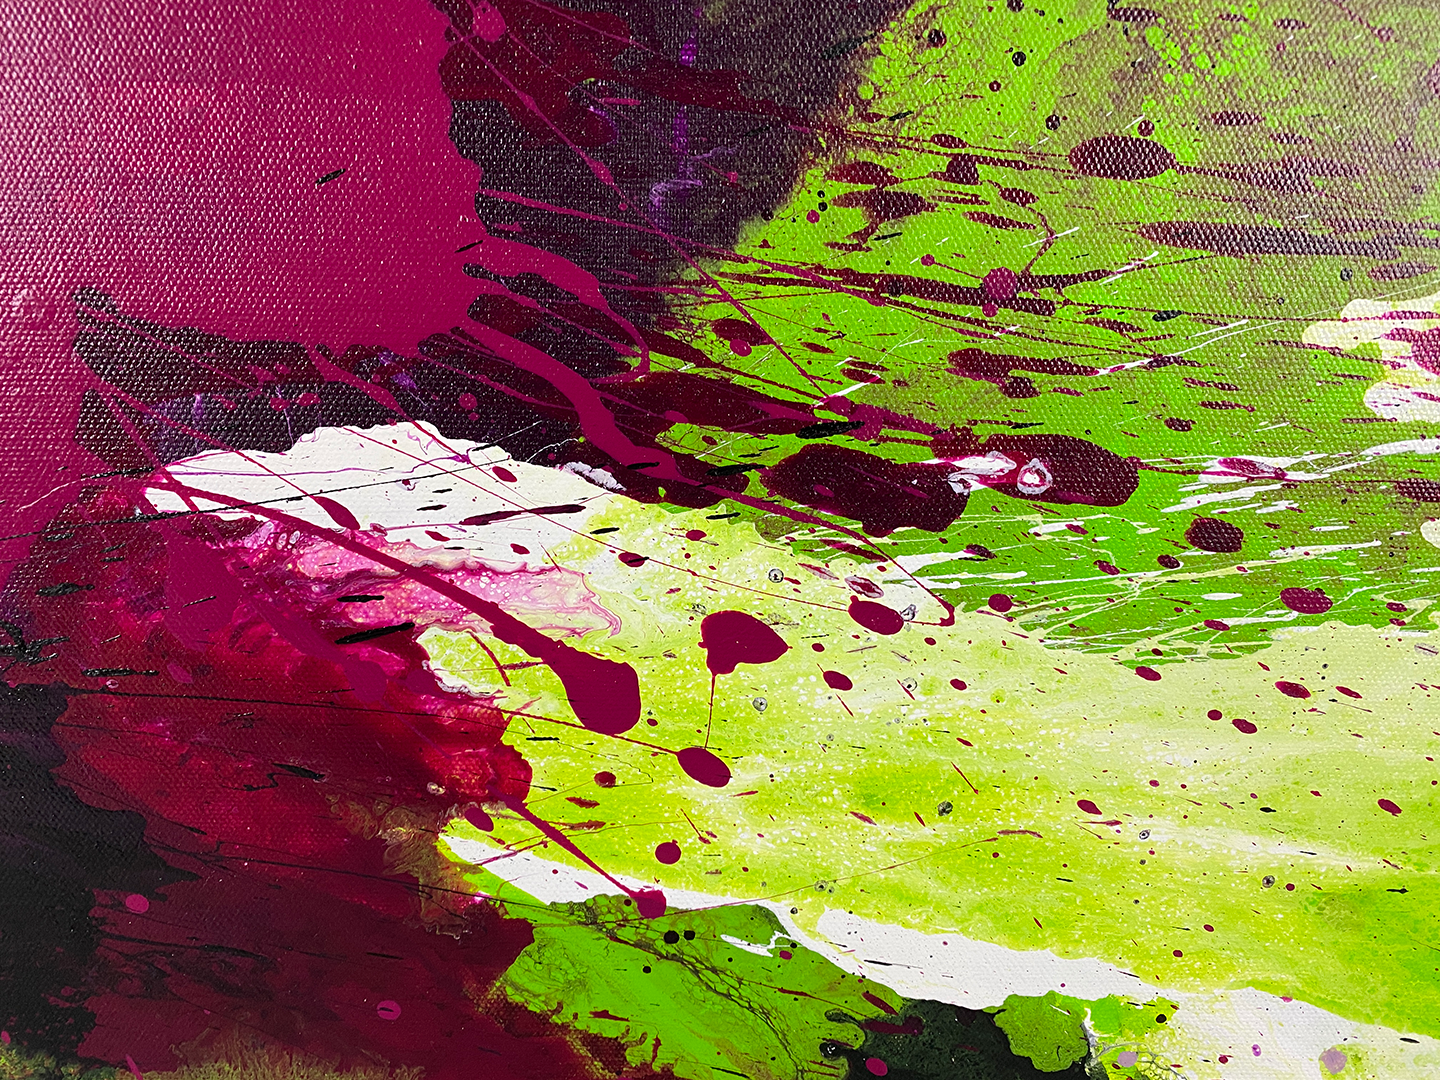 Abstract Expressionism close-up view 2: purple, magenta, lime-green and white on gallery-wrapped canvas